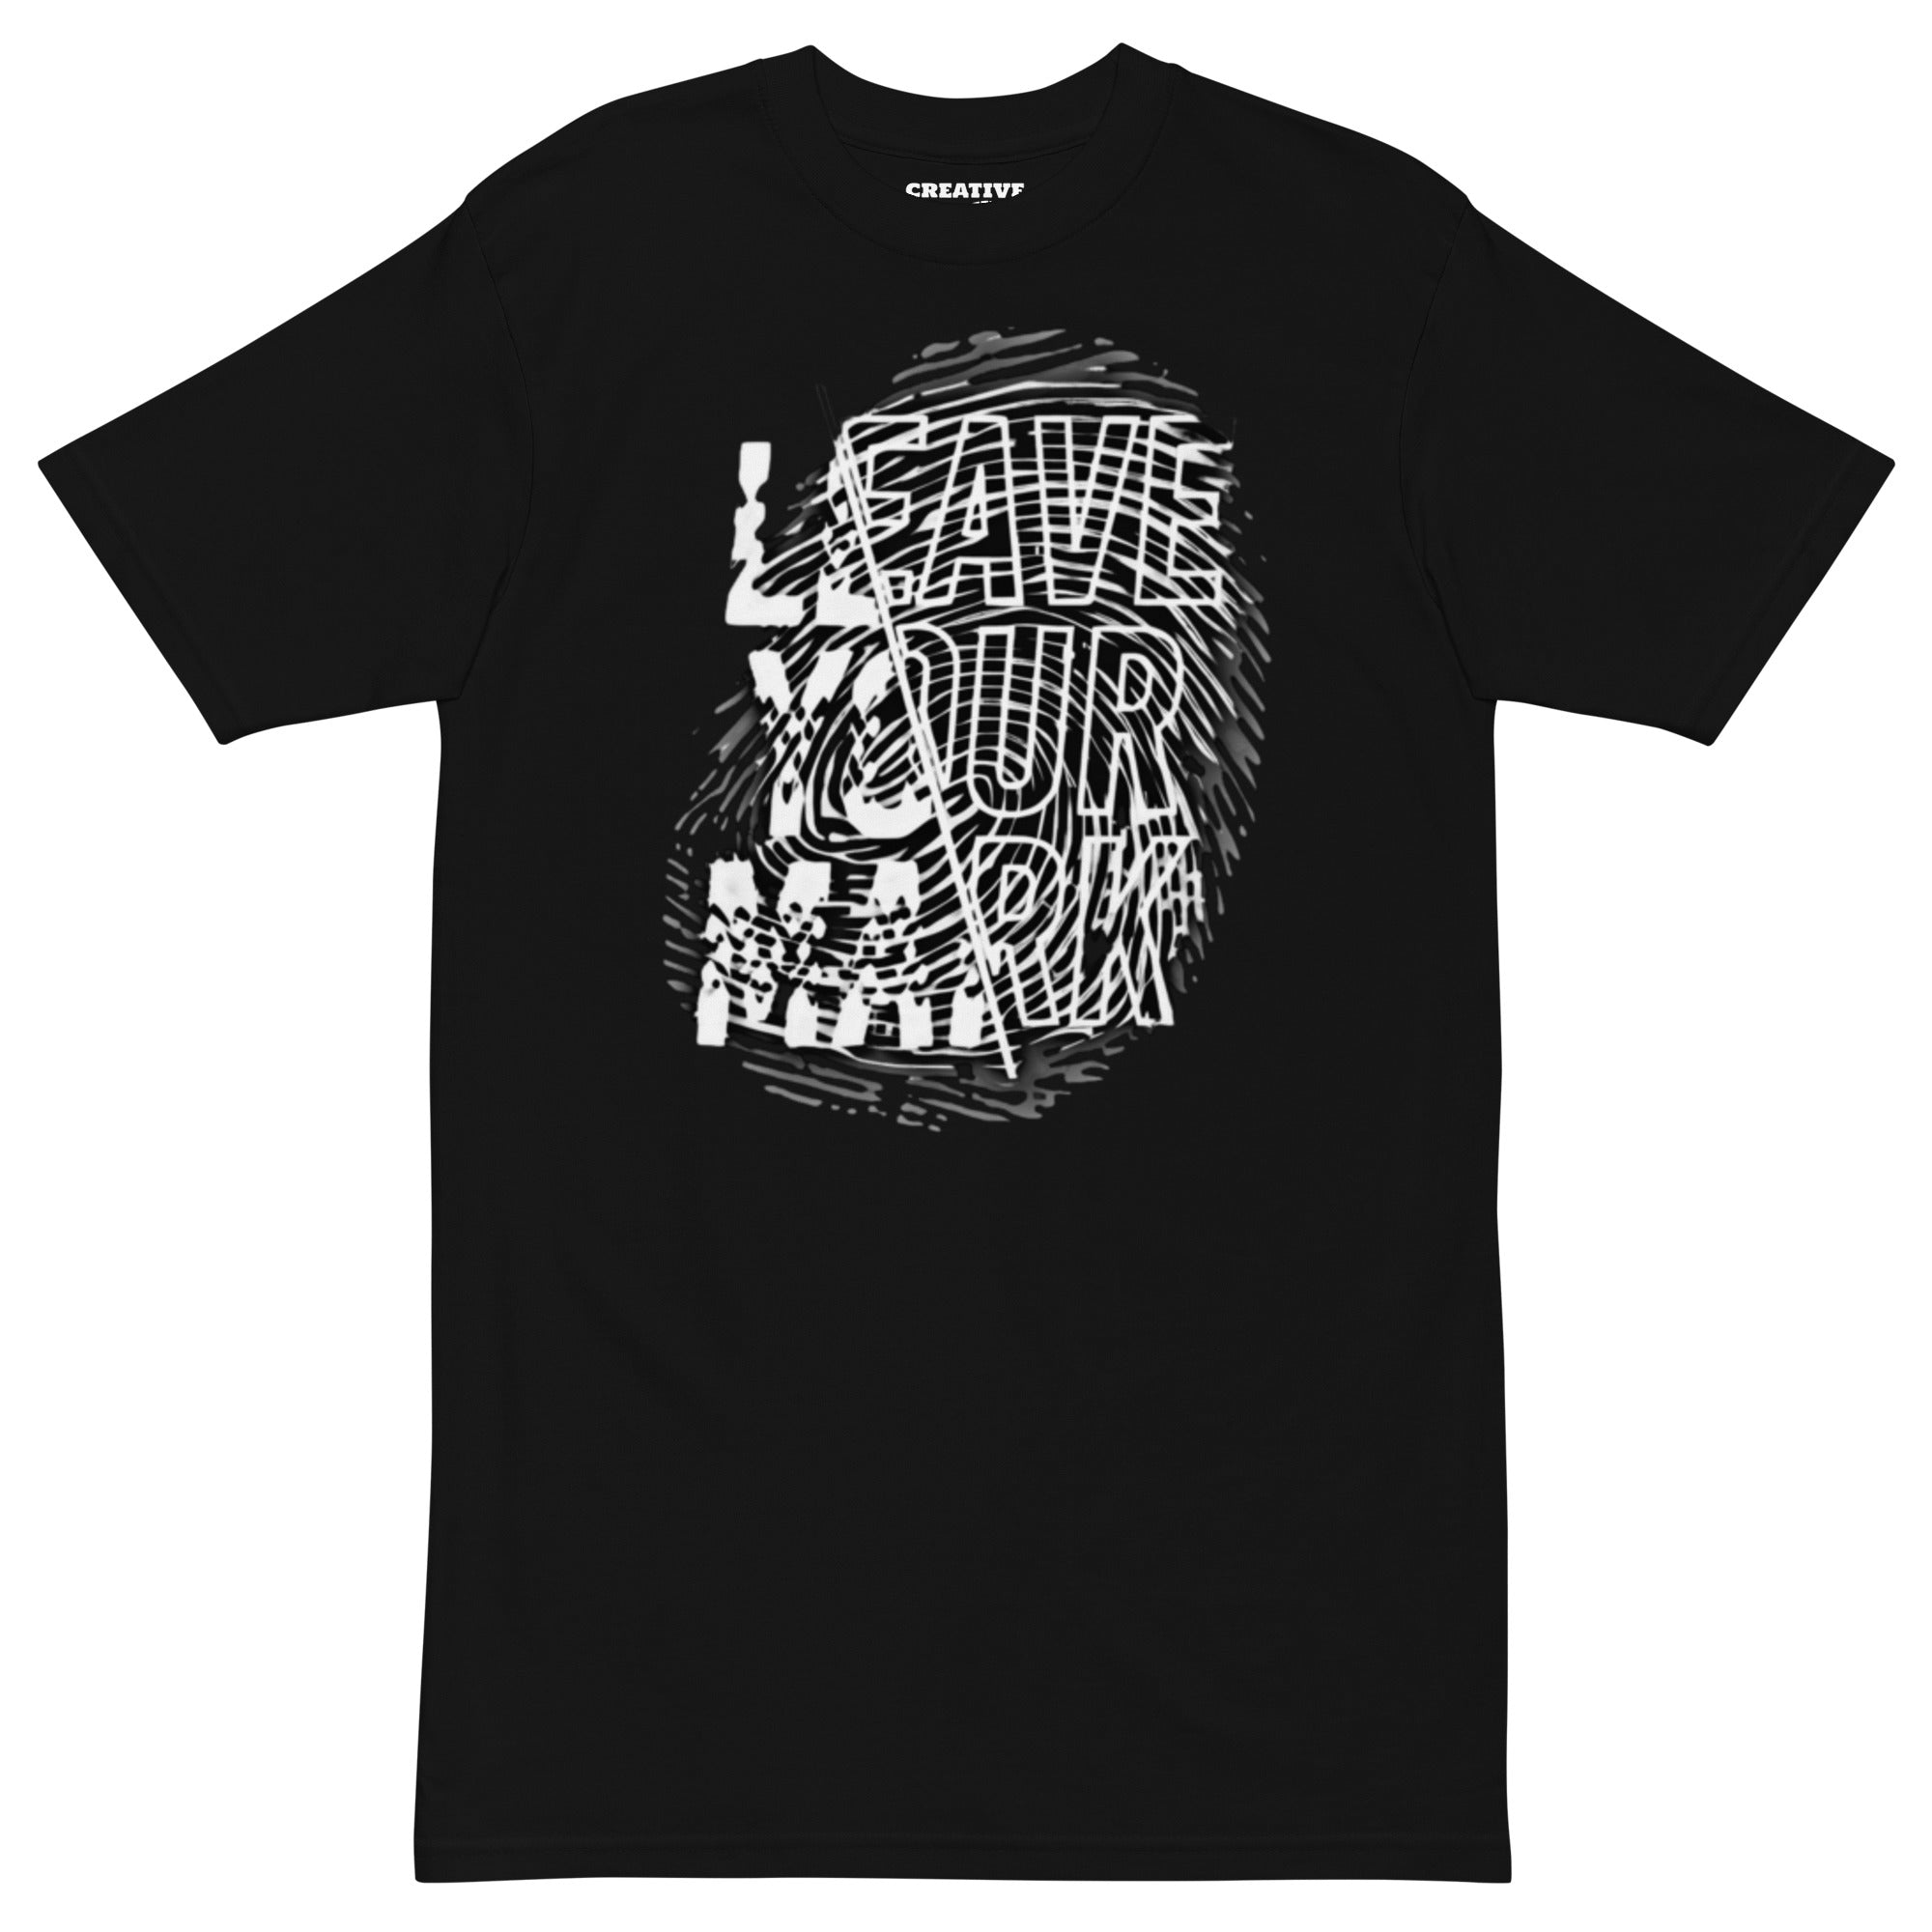 Leave Your Mark Graphic Tee